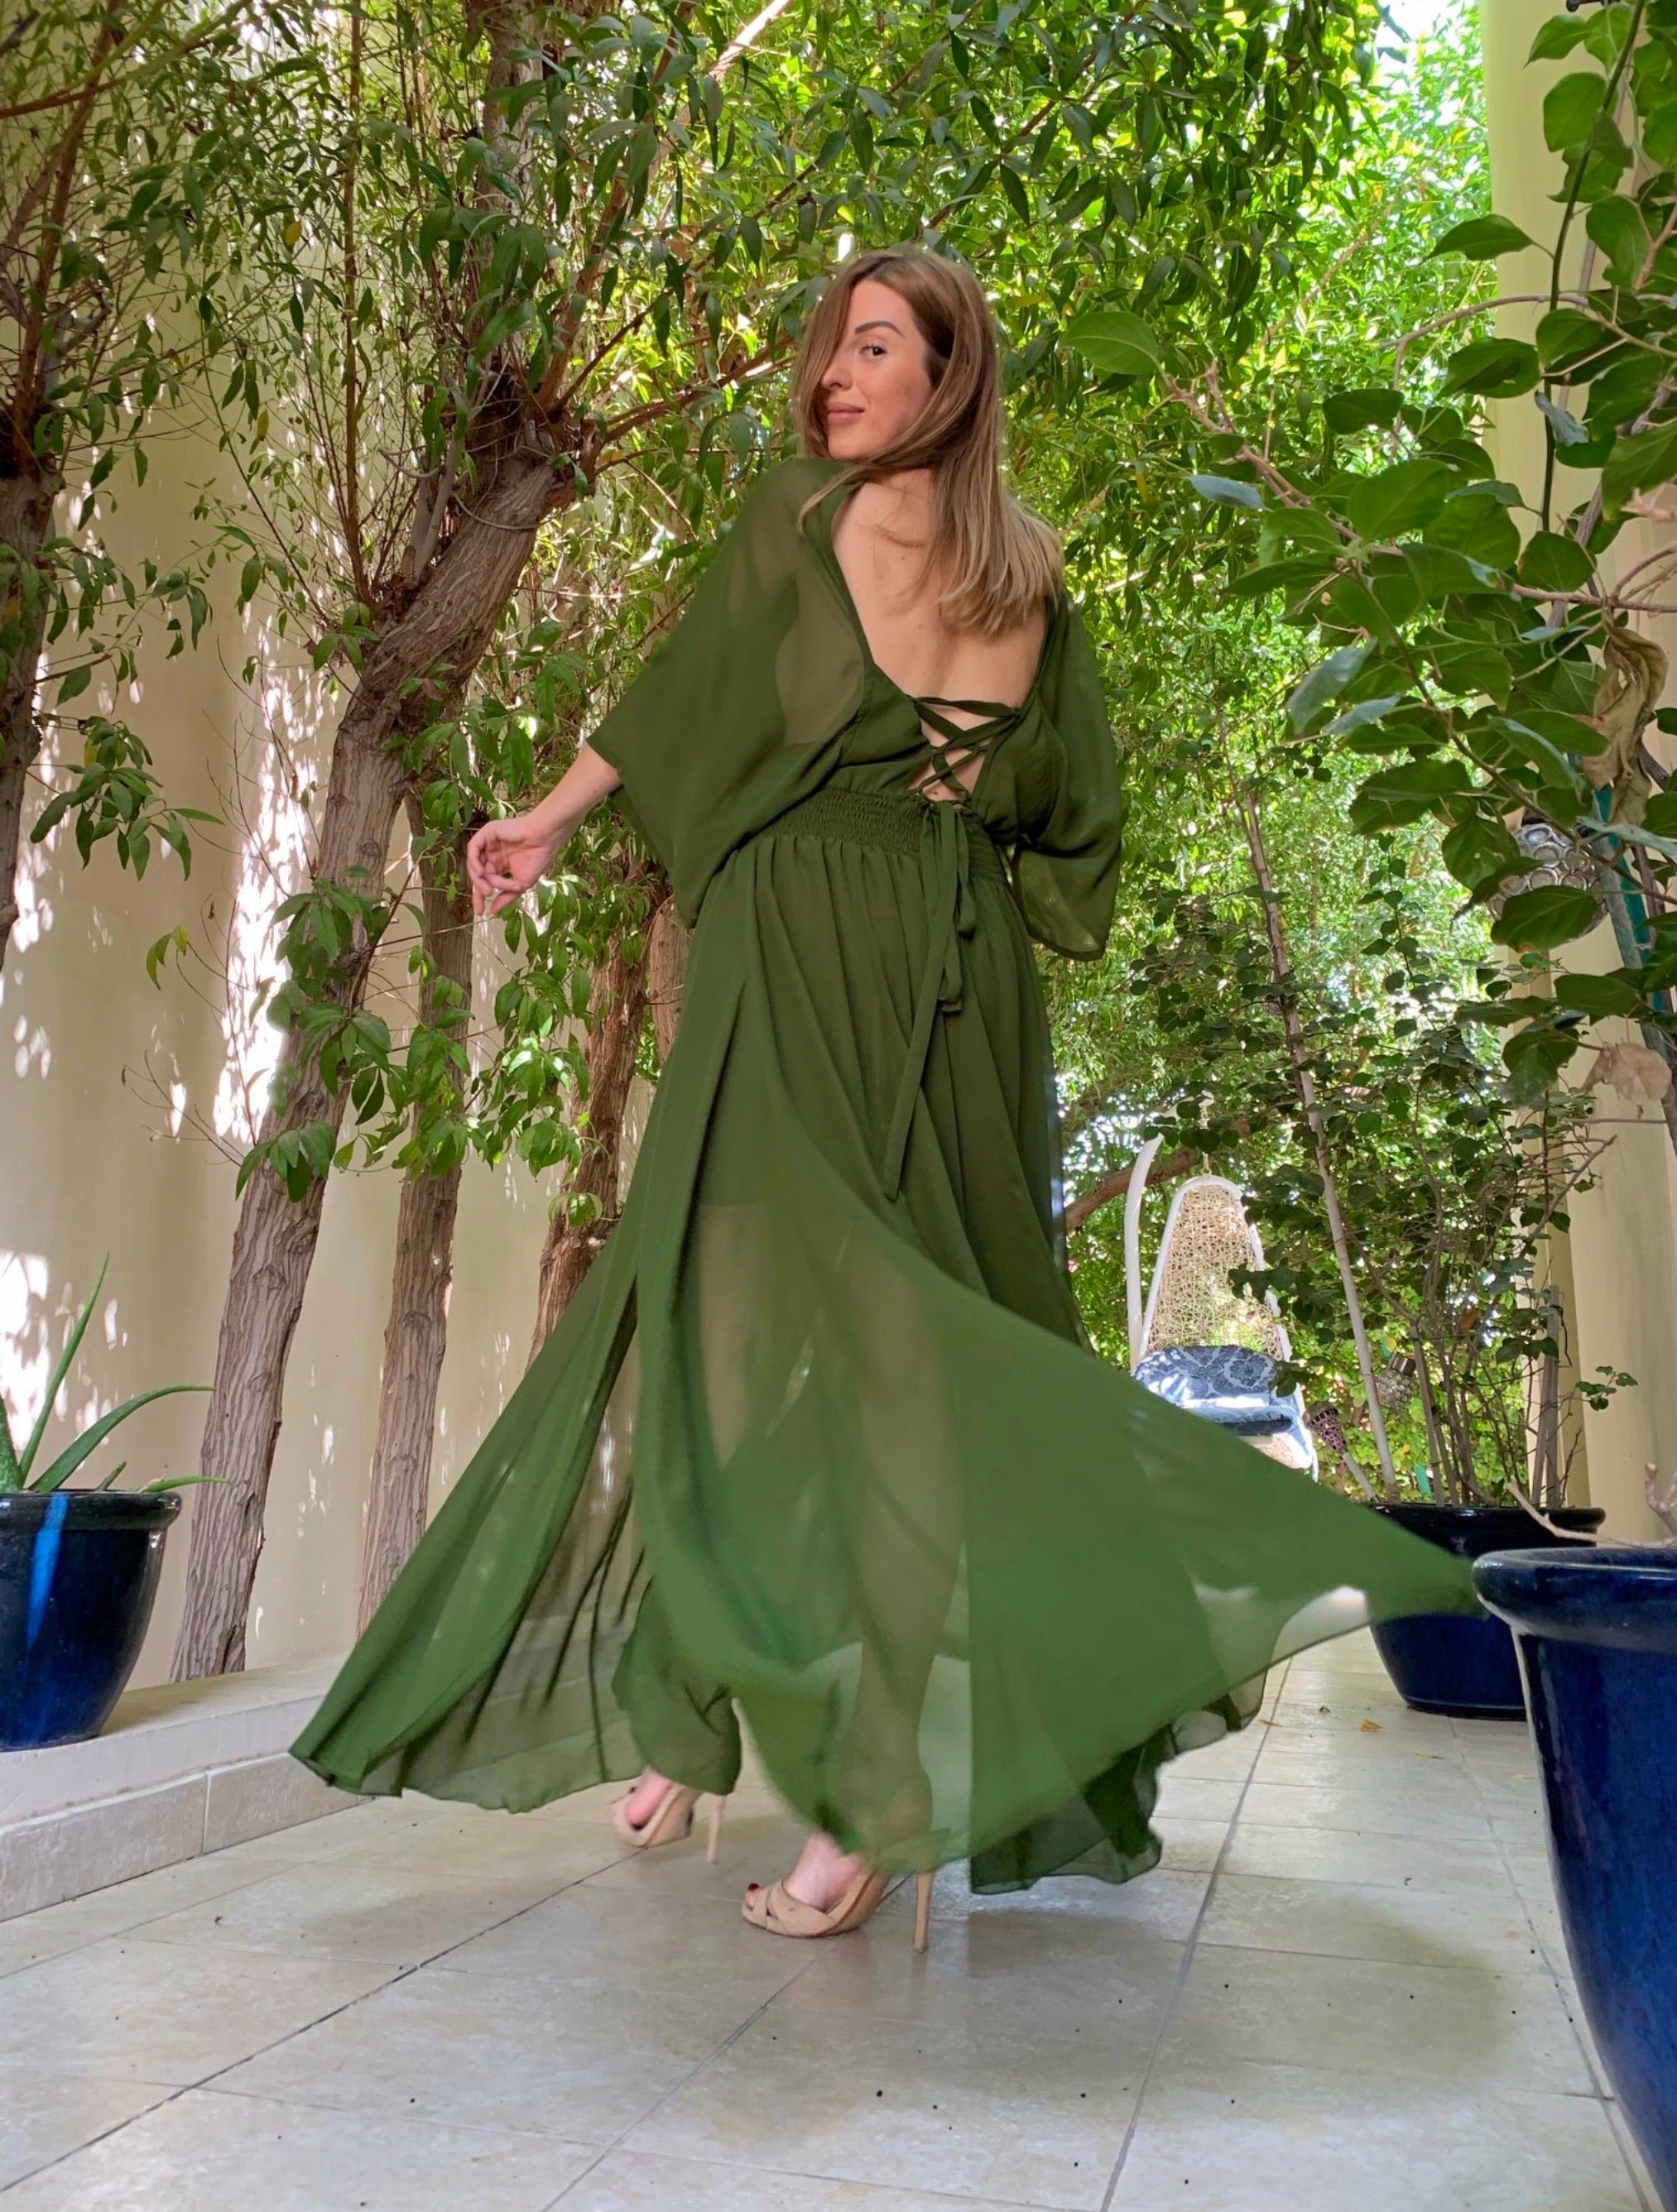 The Goddess Dress in Mother Earth